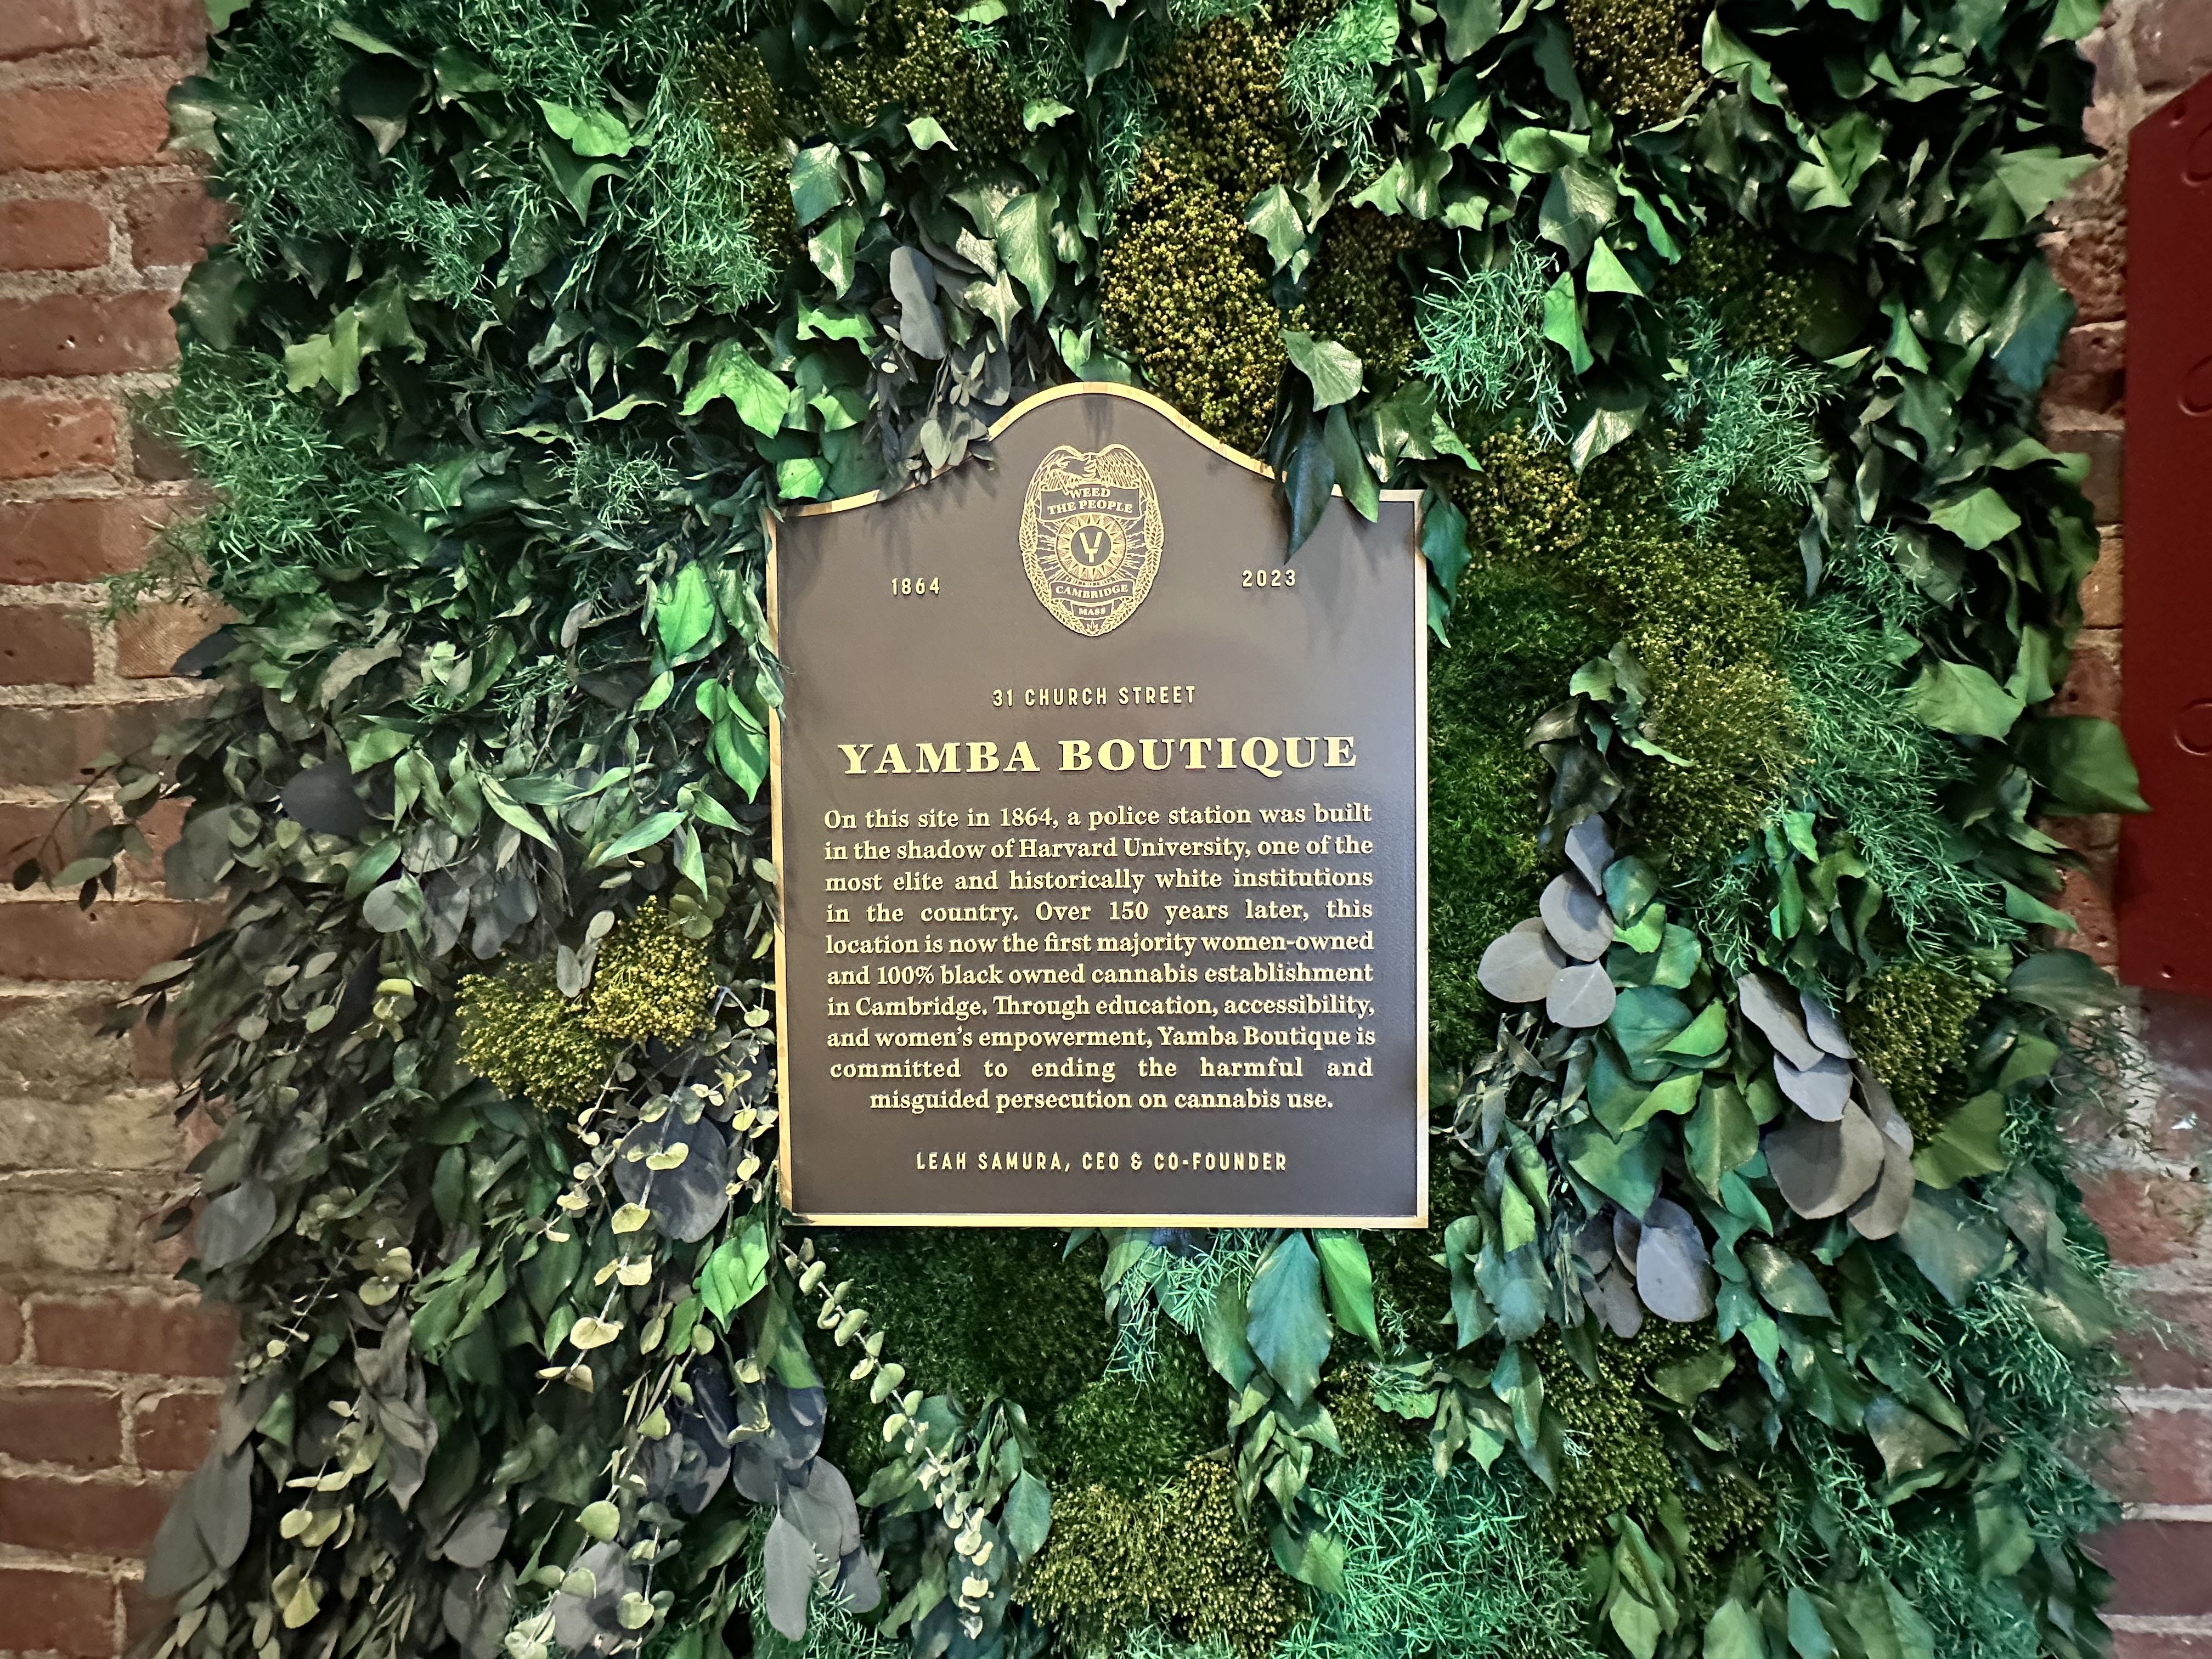 A plaque at the entry of Yamba Boutique says: "On this site in 1864, a police station was built in the shadow of Harvard Univeristy, one of the most elite and historically white institutions in the country. Over 150 years later, this location is now the first majority woman-owned and 100% black owned cannabis establishment in Cambridge. Through education, accessibility and women's empowerment, Yamba Boutique is committed to ending the harmful and misguided persecution on cannabis use."" 